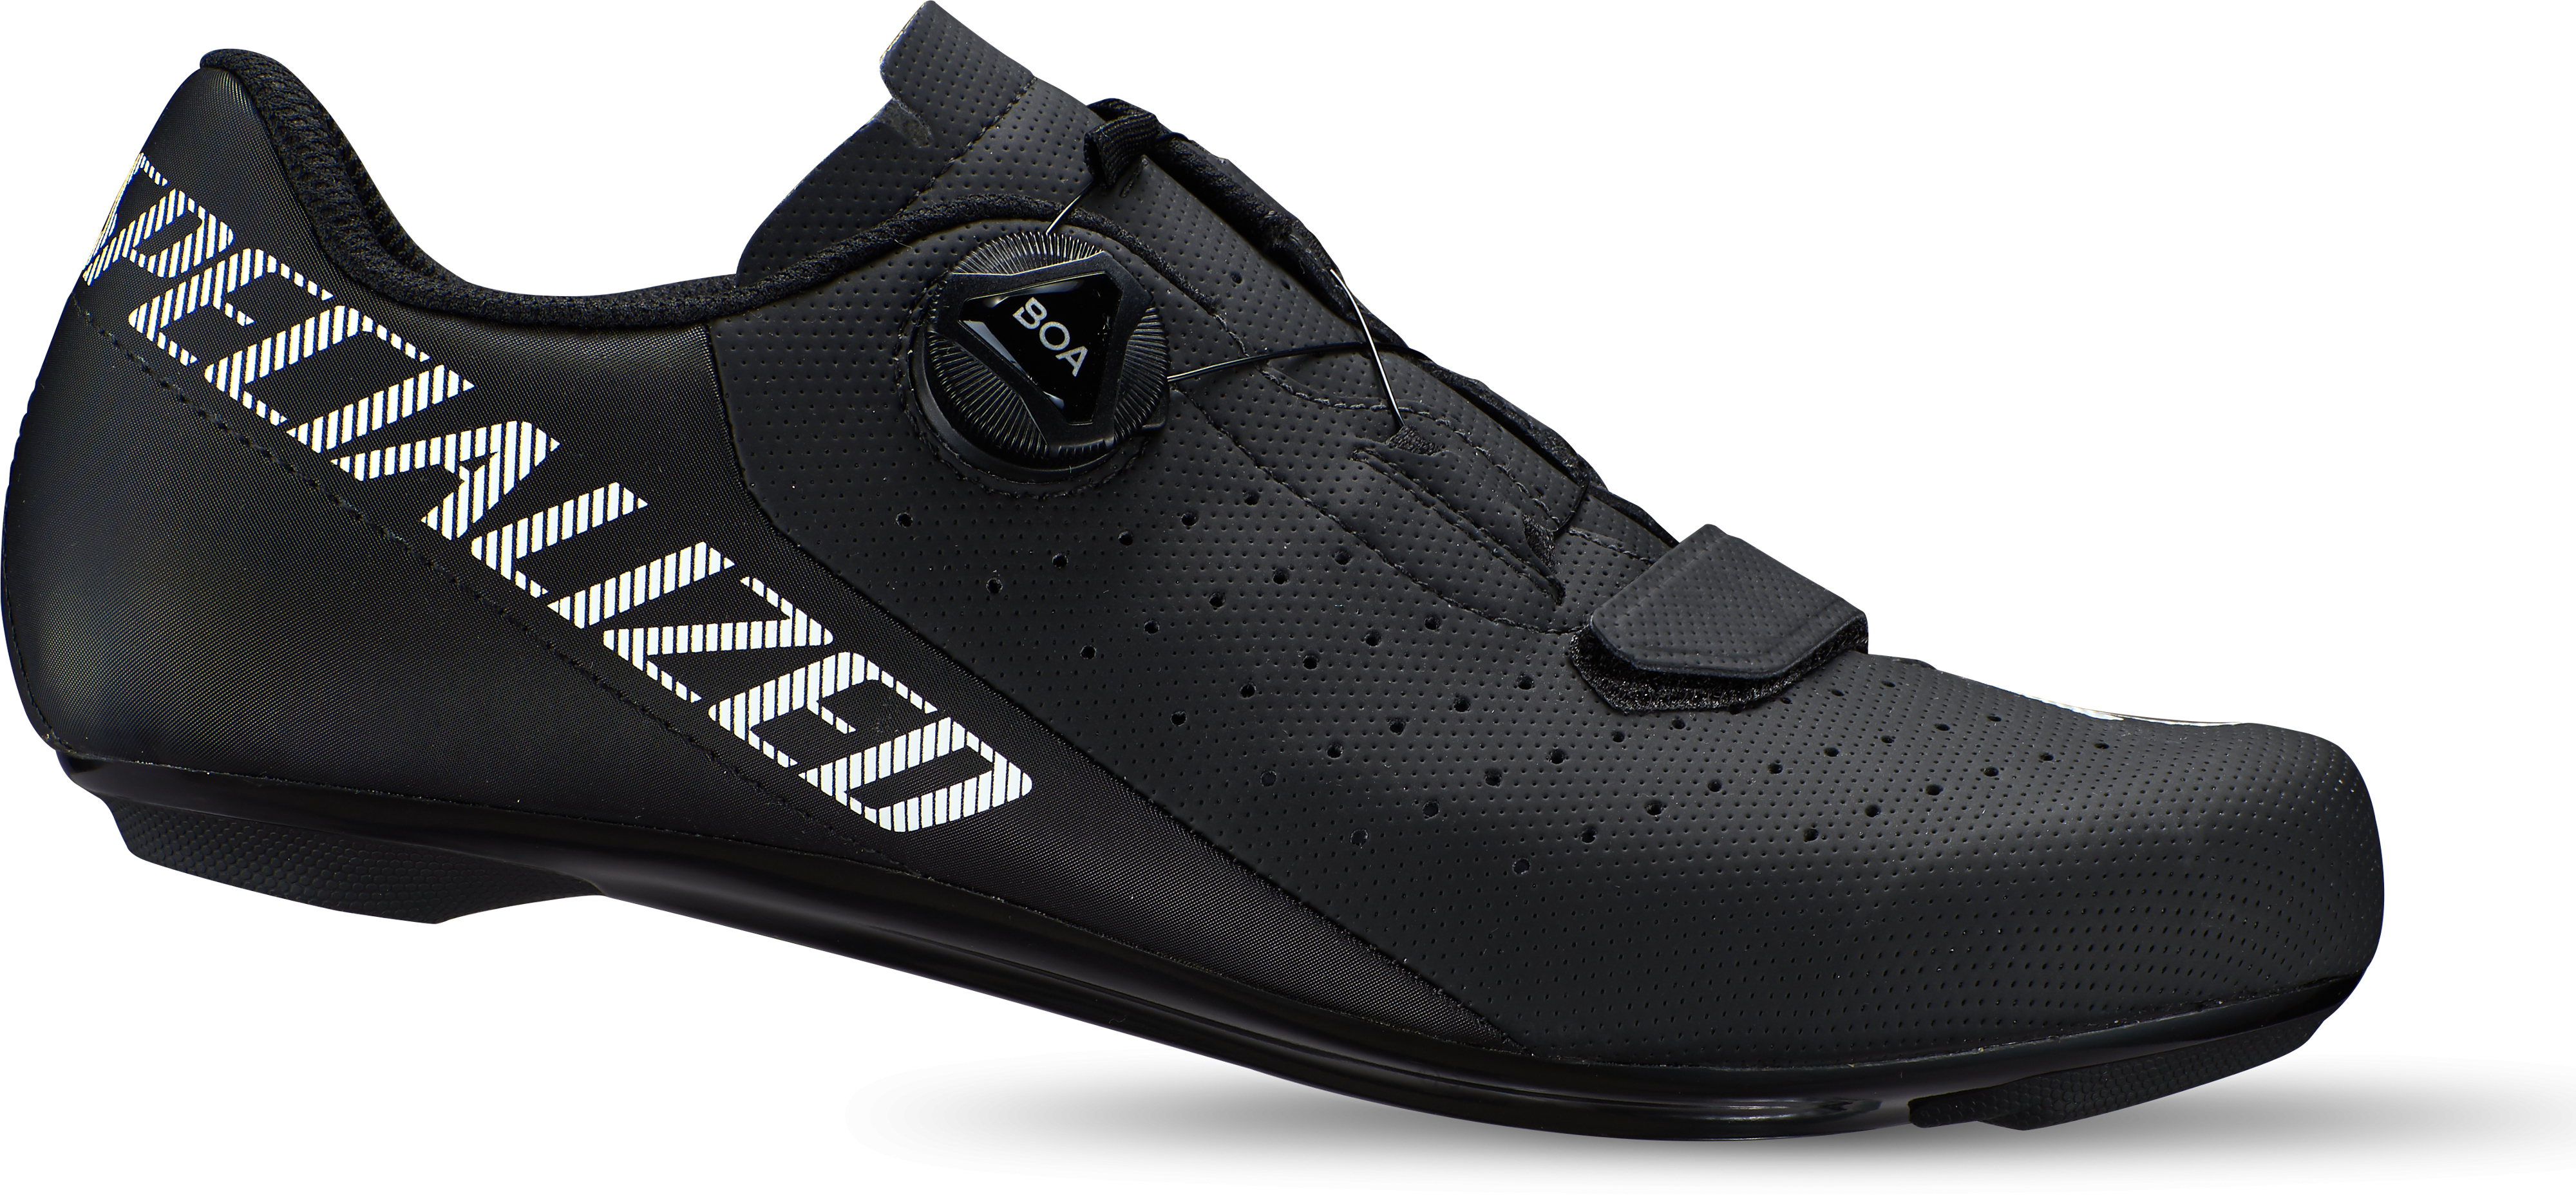 Specialized  Torch 1.0 Road Cycling Shoes  36 Black